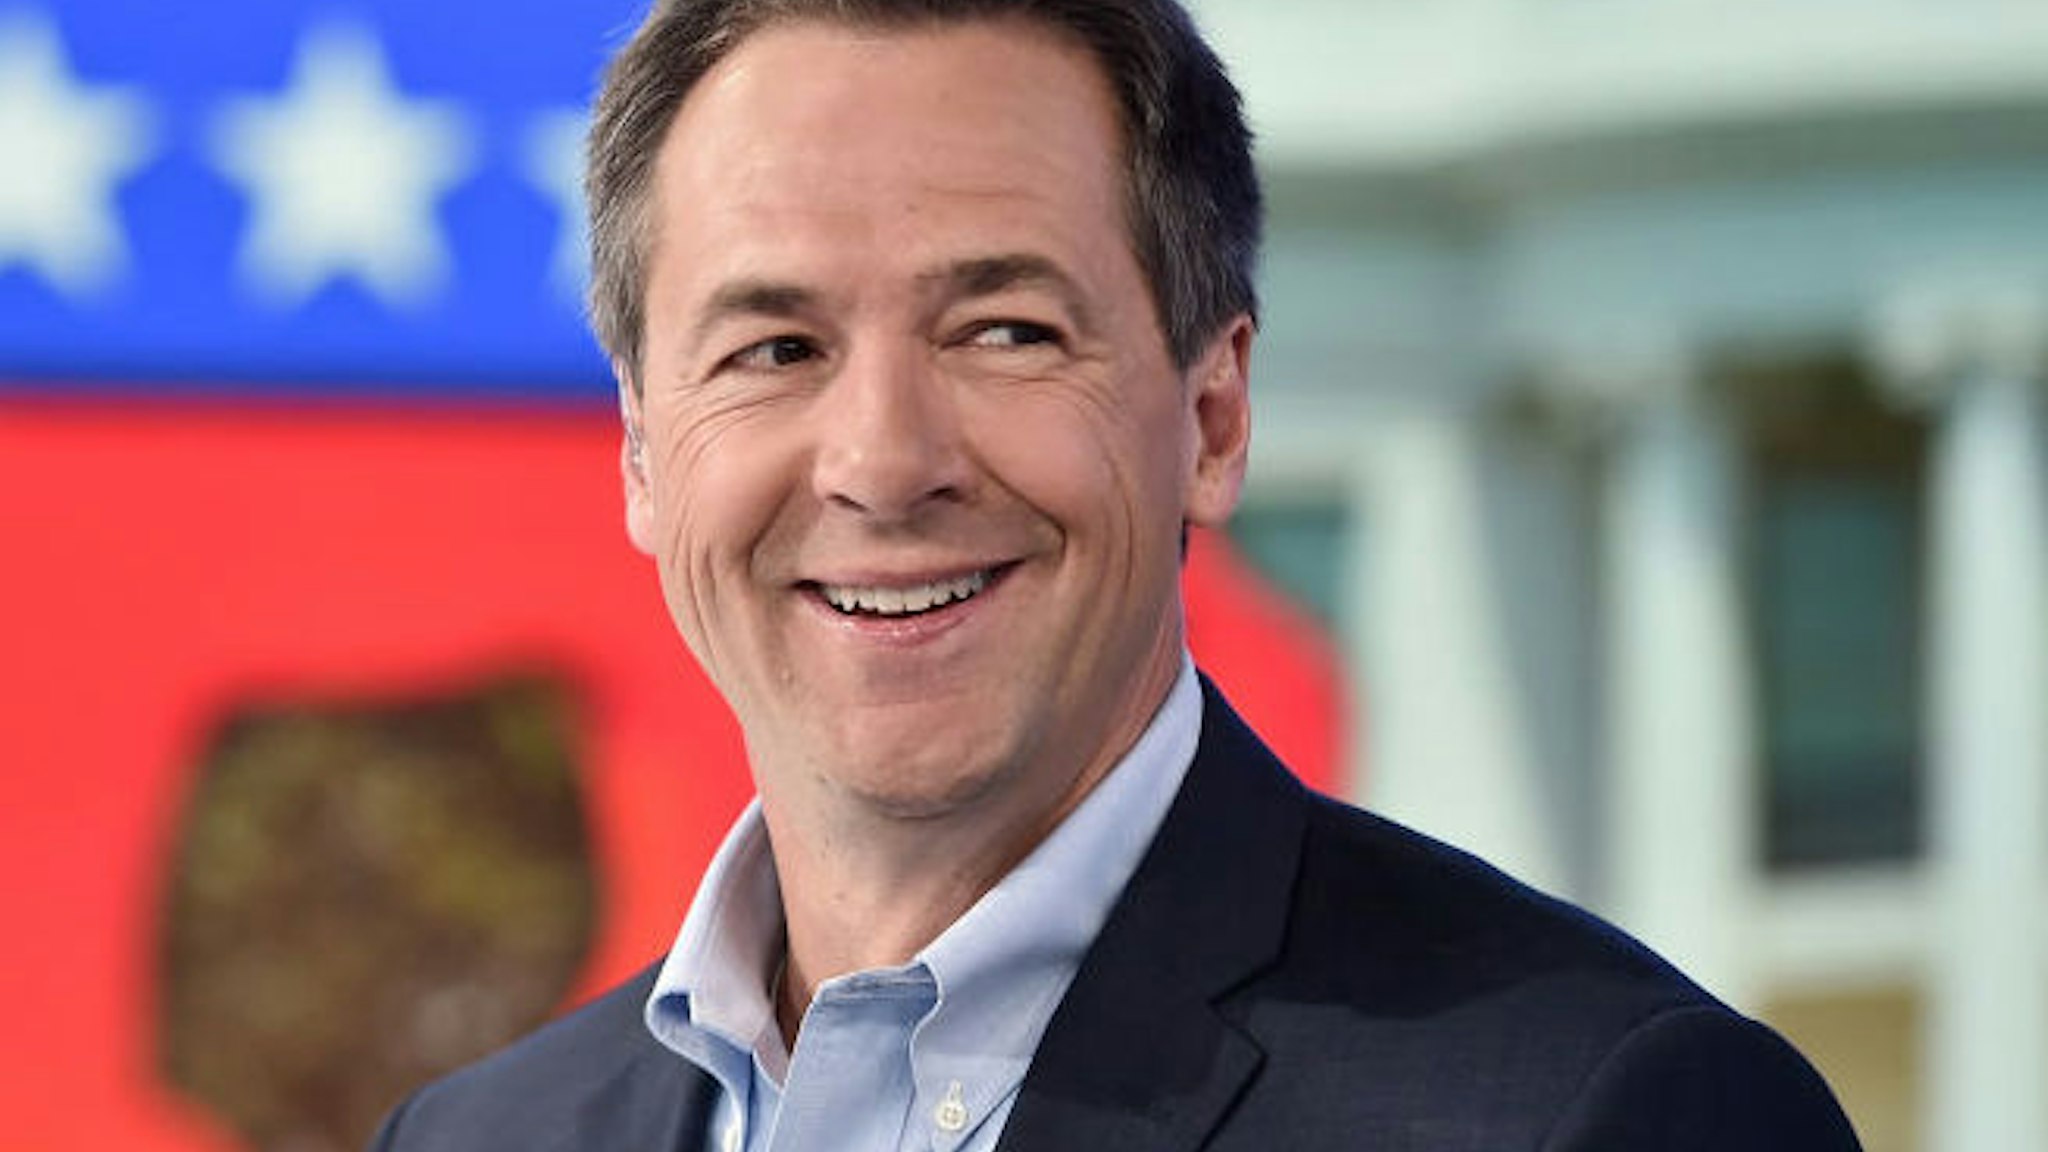 NEW YORK, NY - MAY 15: Governor of Montana and democratic presidential candidate Steve Bullock visits "The Daily Briefing" with Dana Perino at Fox News Channel Studios on May 15, 2019 in New York City.